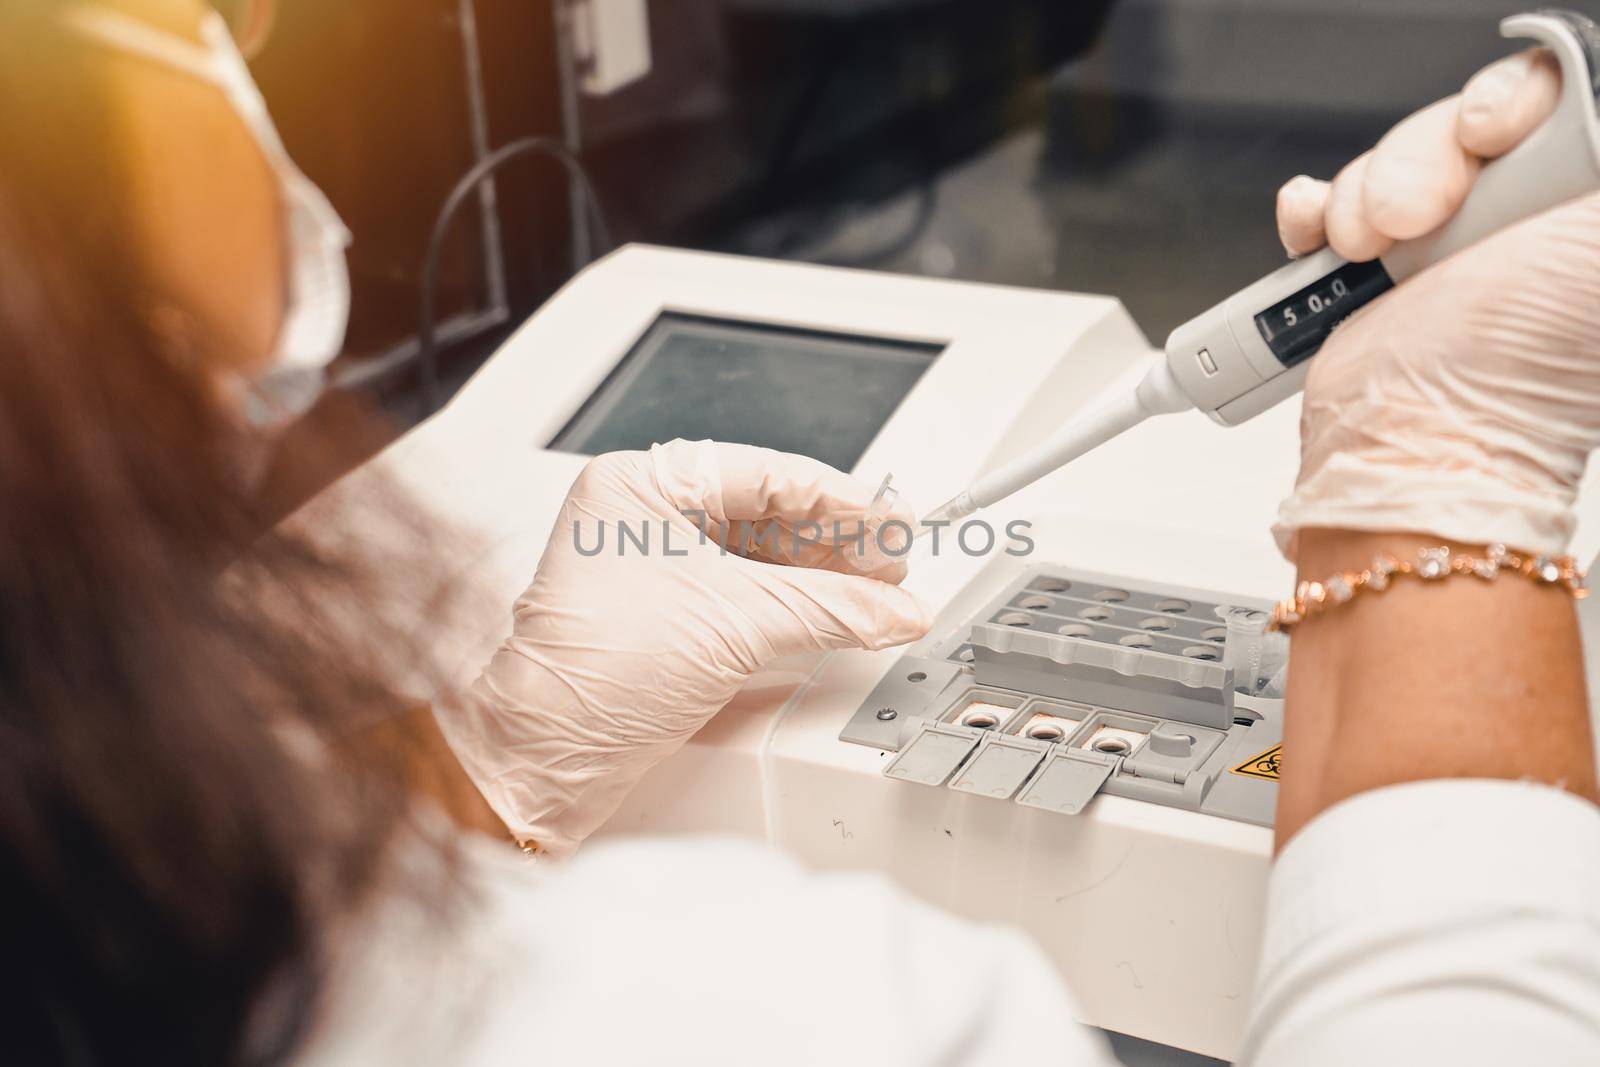 Clinical analyst testing medical blood sample in a hospital laboratory by cfalvarez